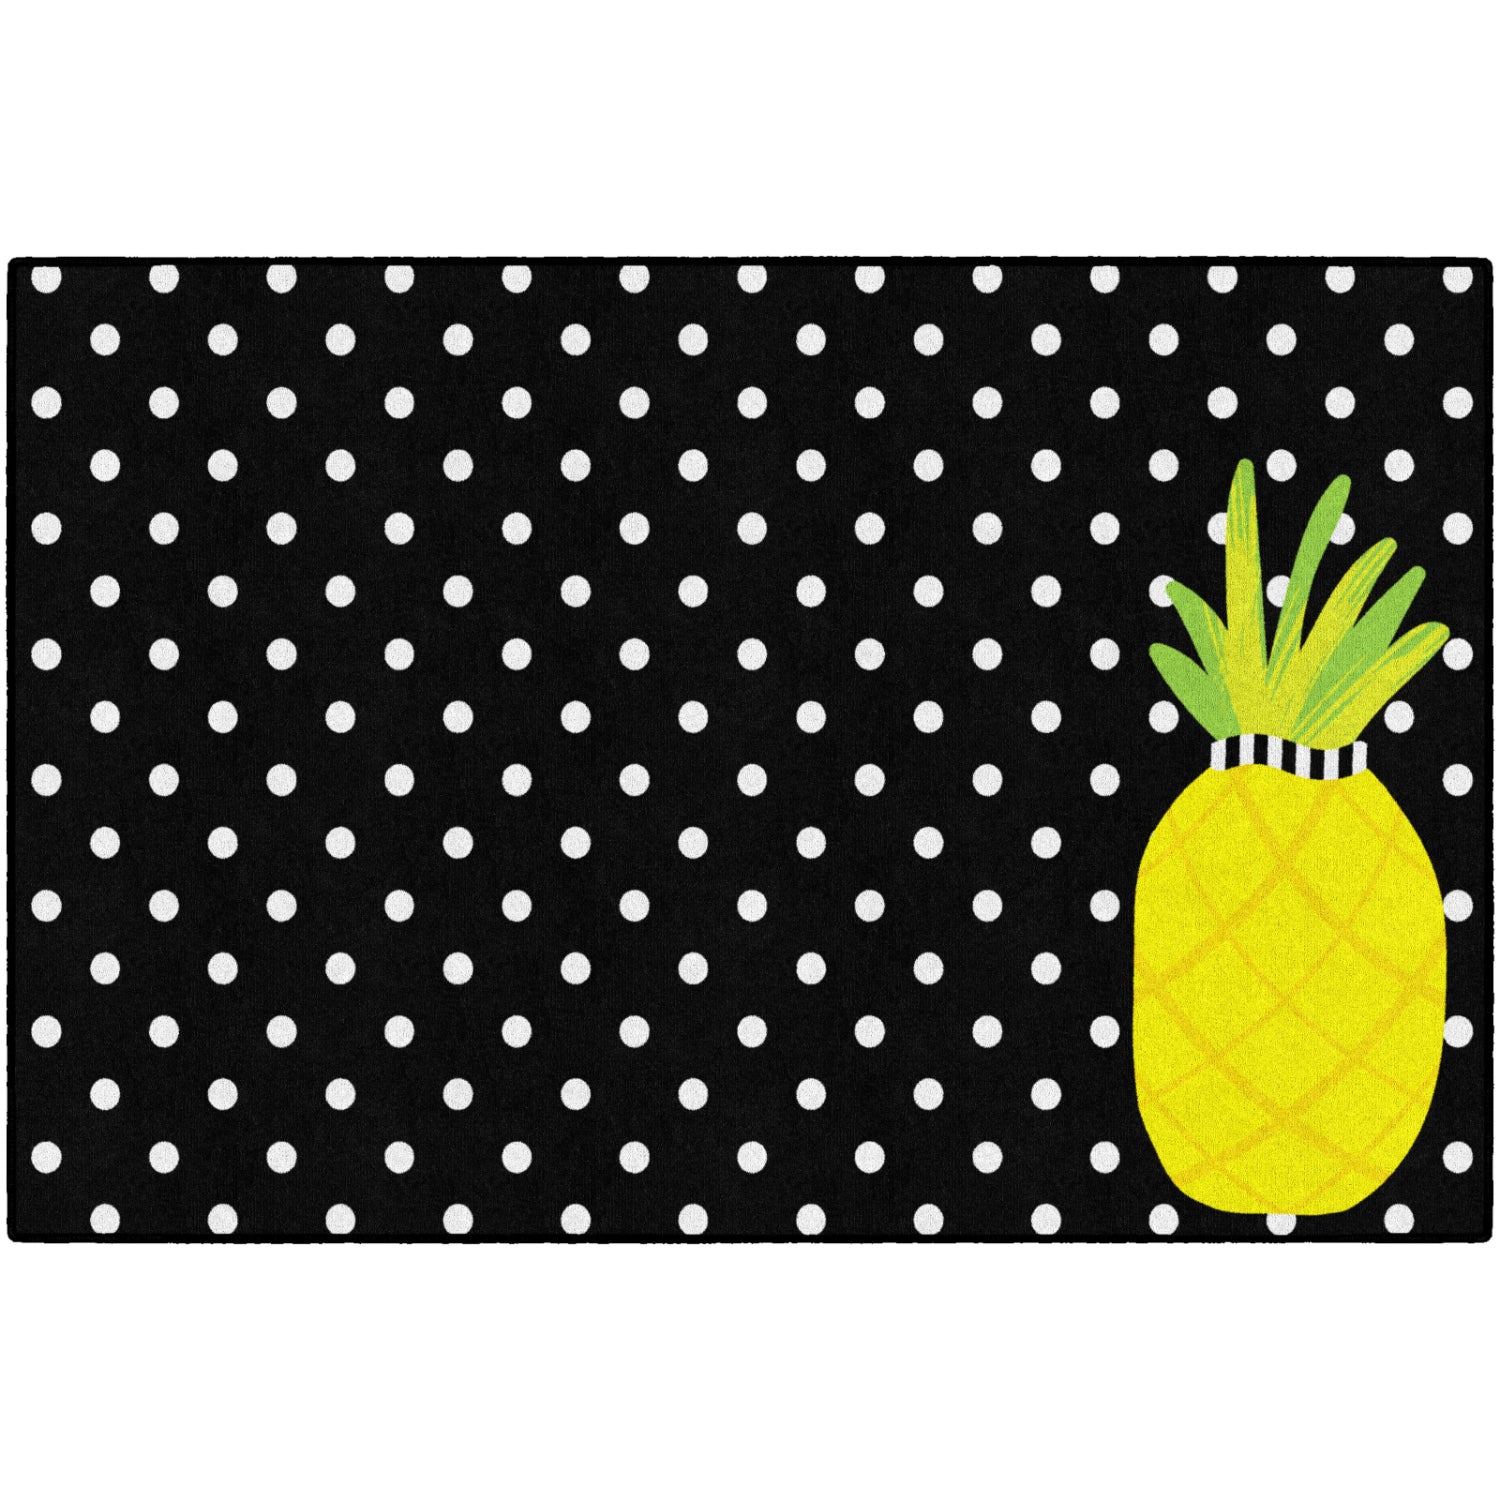 Schoolgirl Style Simply Stylish Tropical Pineapple Small Polka Dots Rugs